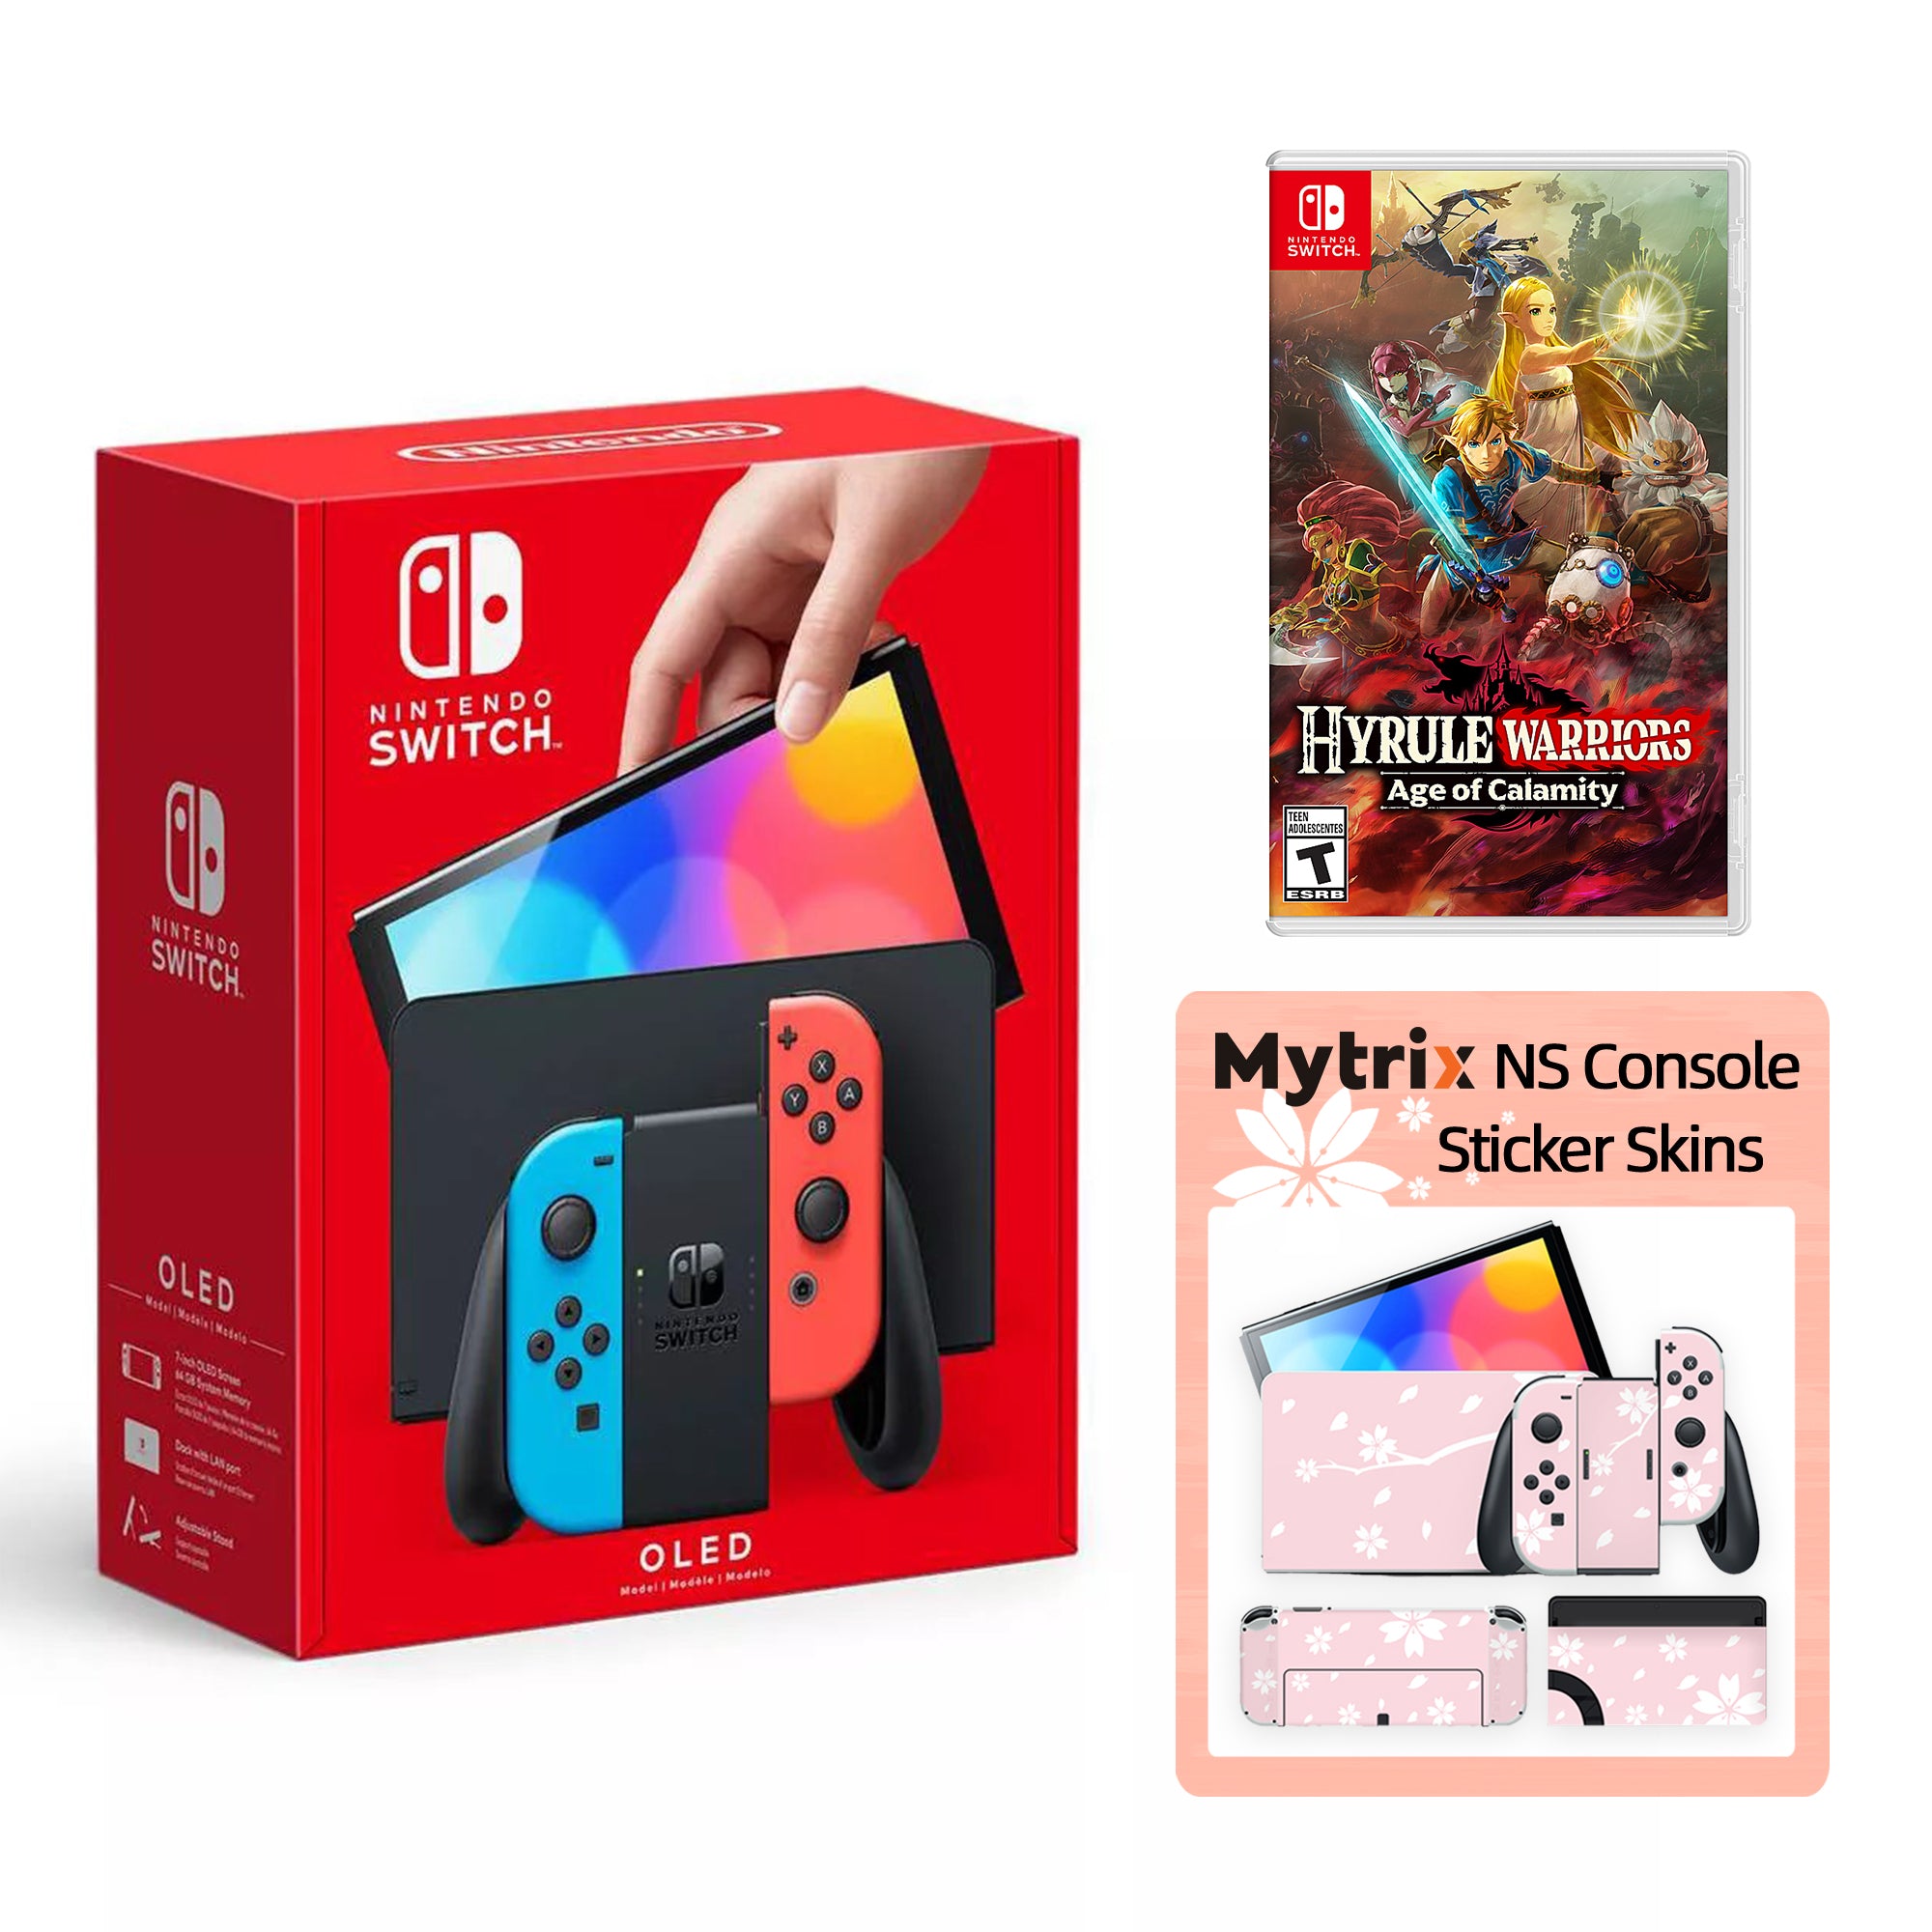 2022 New Nintendo Switch OLED Model Neon Red Blue with Hyrule Warriors: Age of Calamity and Mytrix Full Body Skin Sticker for NS OLED Console, Dock and Joycons - Sakura Pink